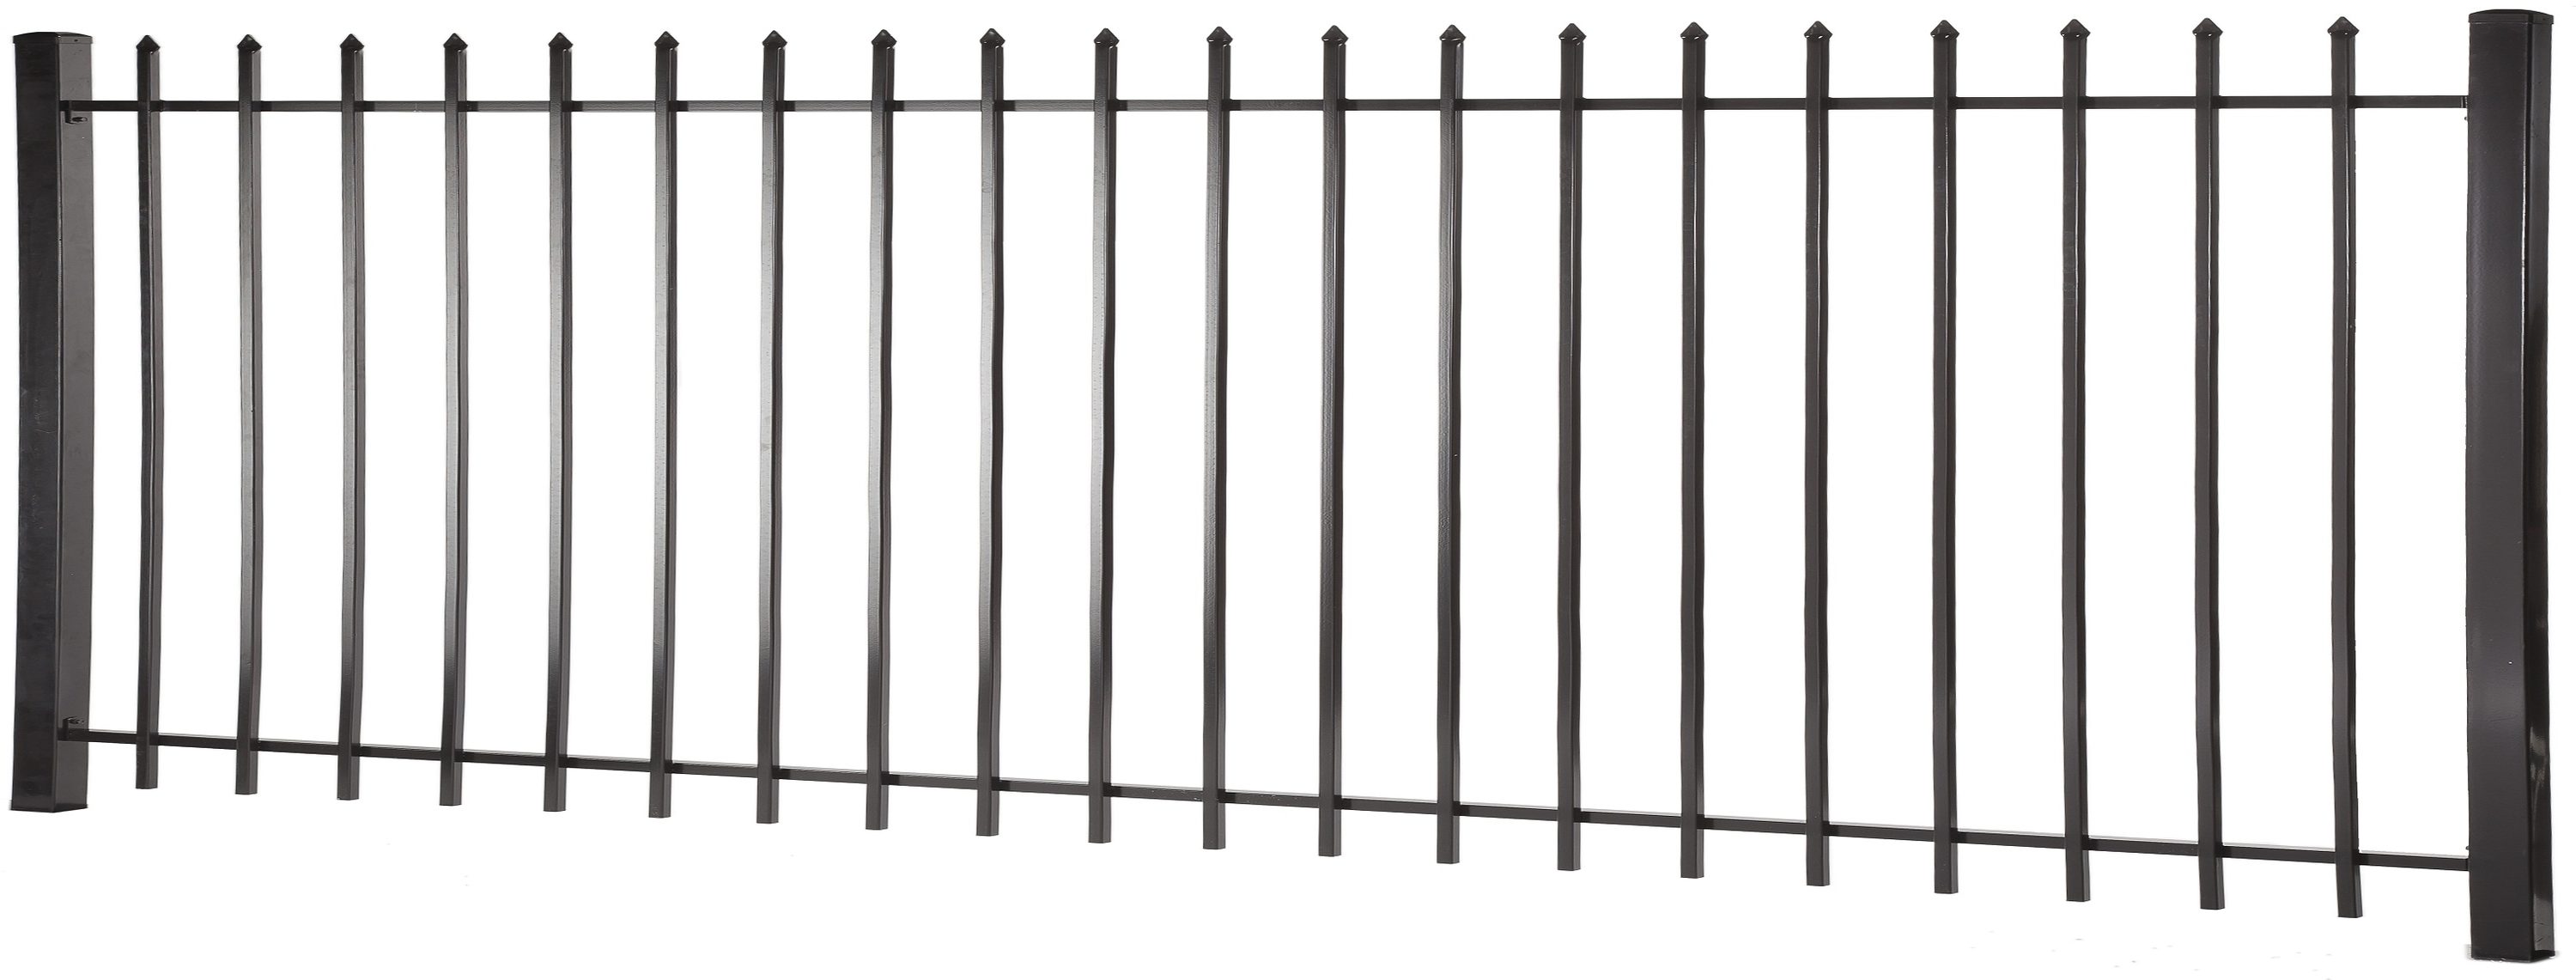 Lafayette 3-ft H x 8-ft W Black Steel Decorative Fence Panel in the ...